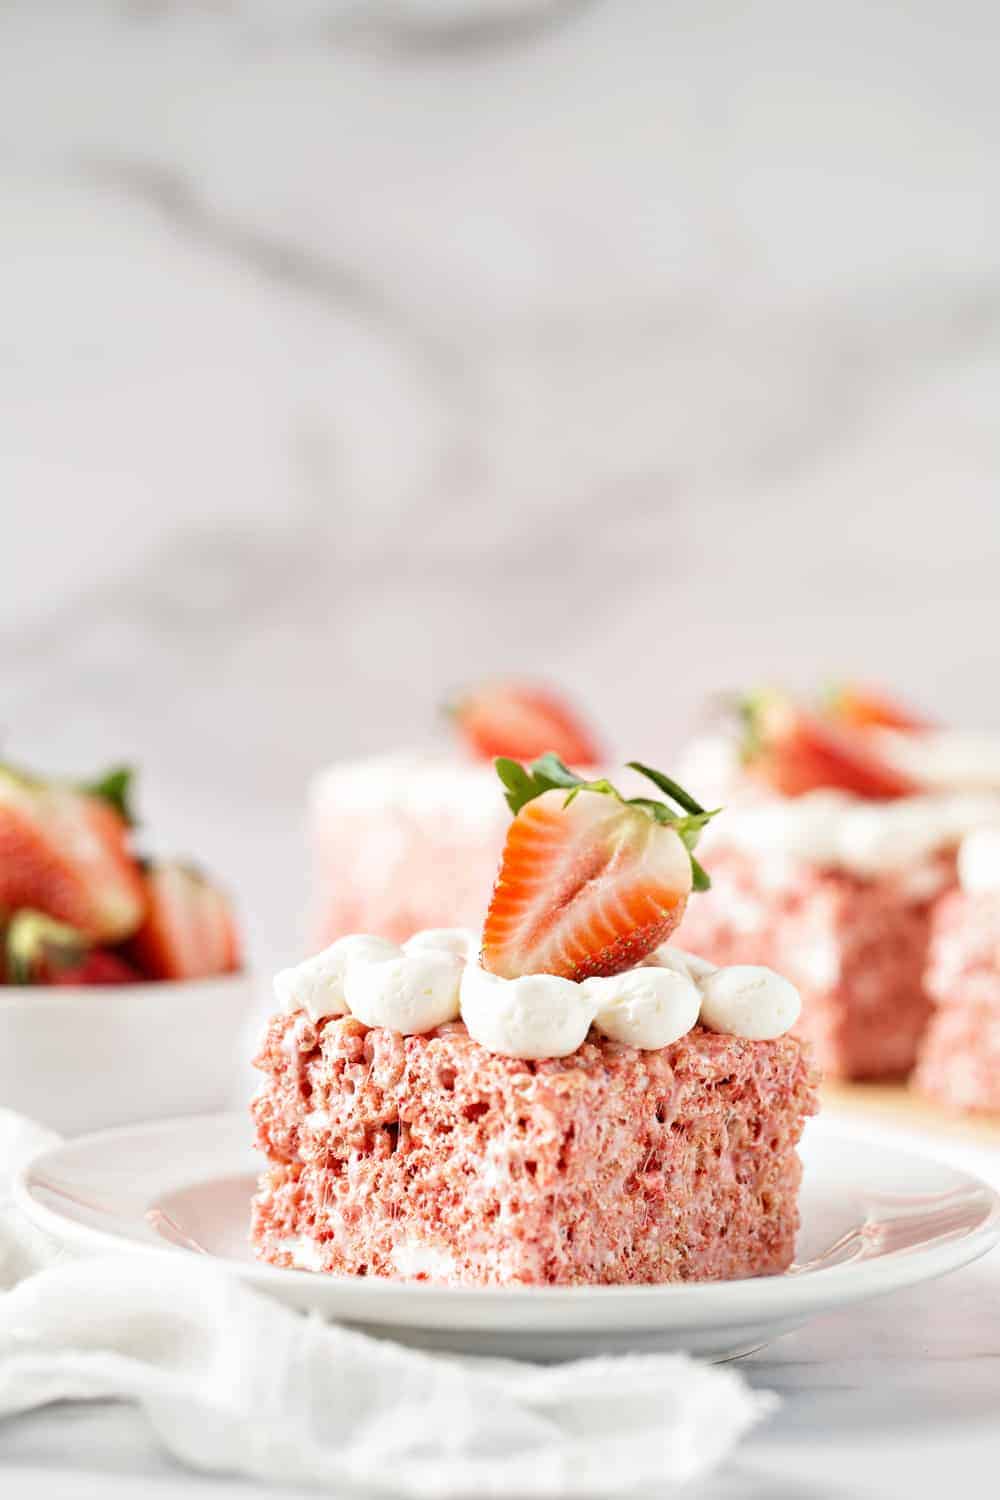 Strawberry Rice Krispie Treats are perfectly pink and full of fun strawberry flavor. Top them with pillowy buttercream frosting and fresh strawberries for an extra-special touch.